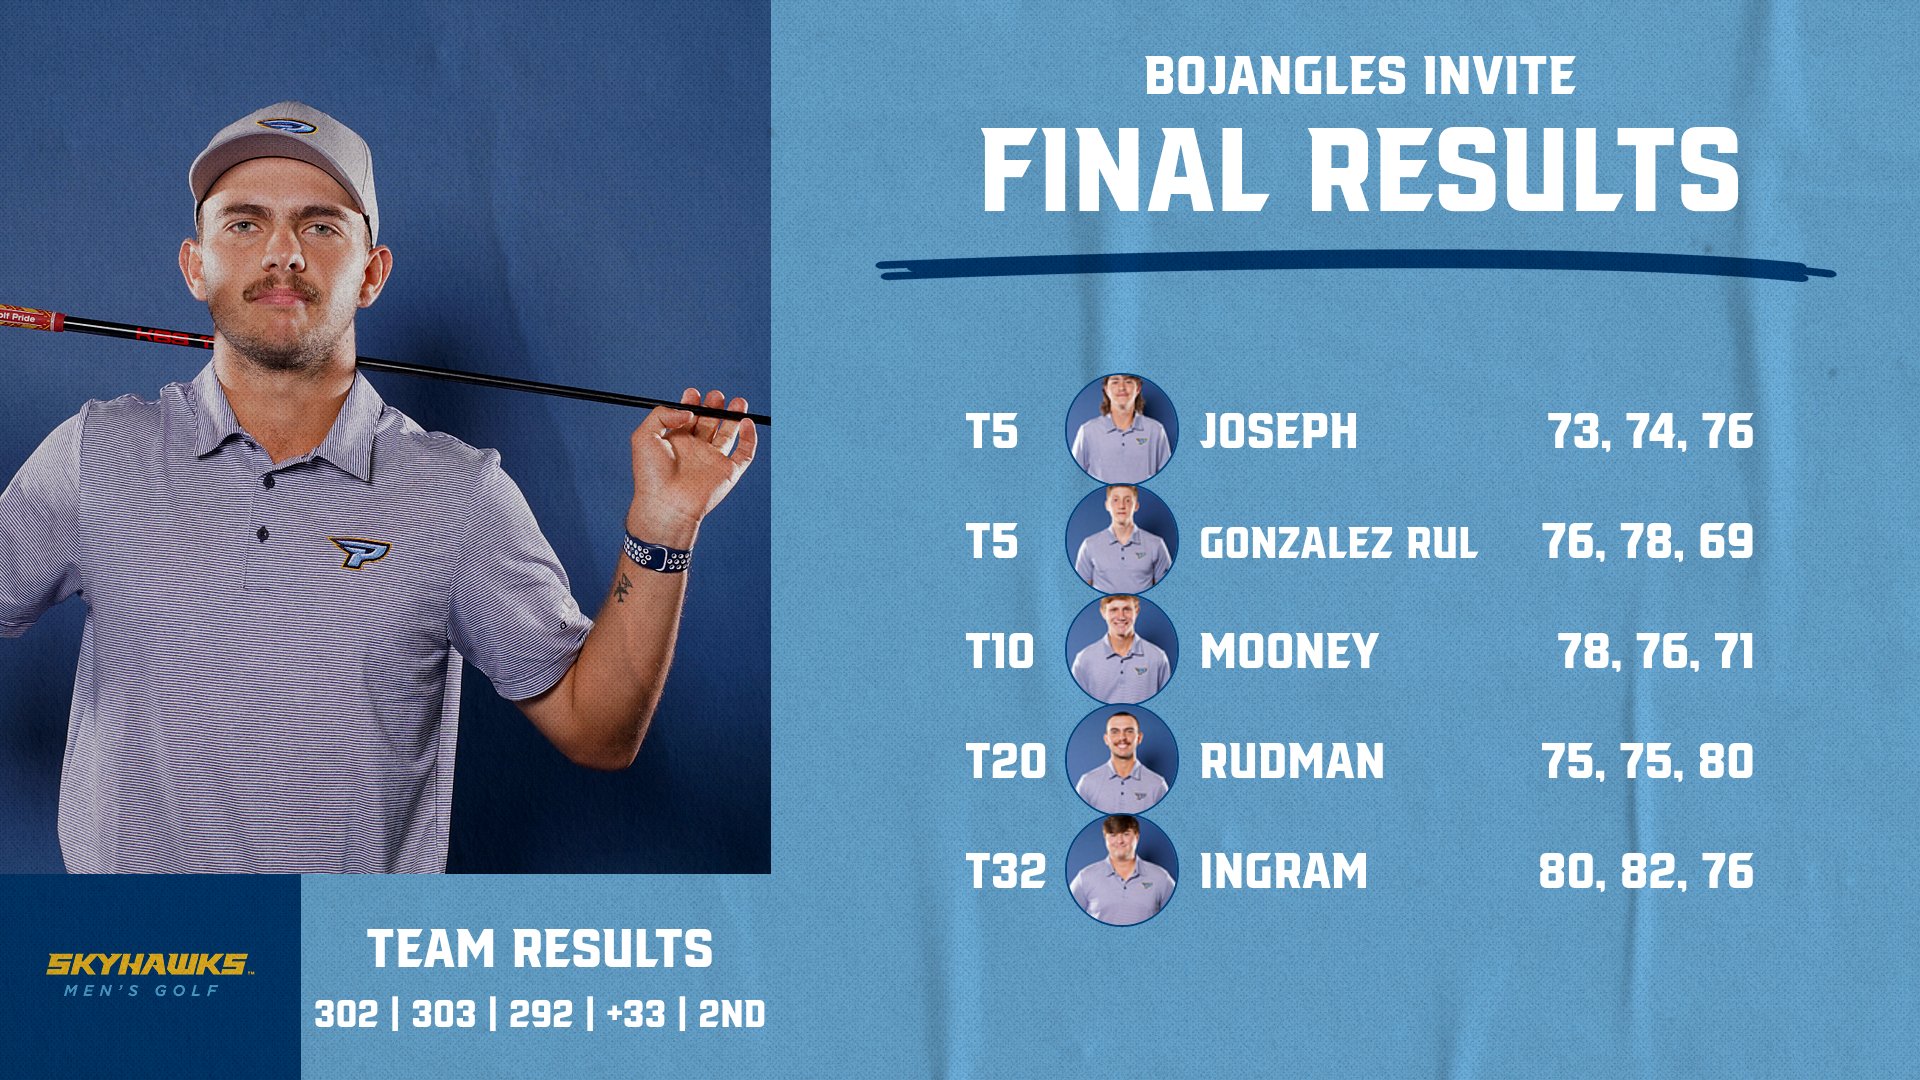 #9 Men’s Golf places 2nd at the Bojangles Invite